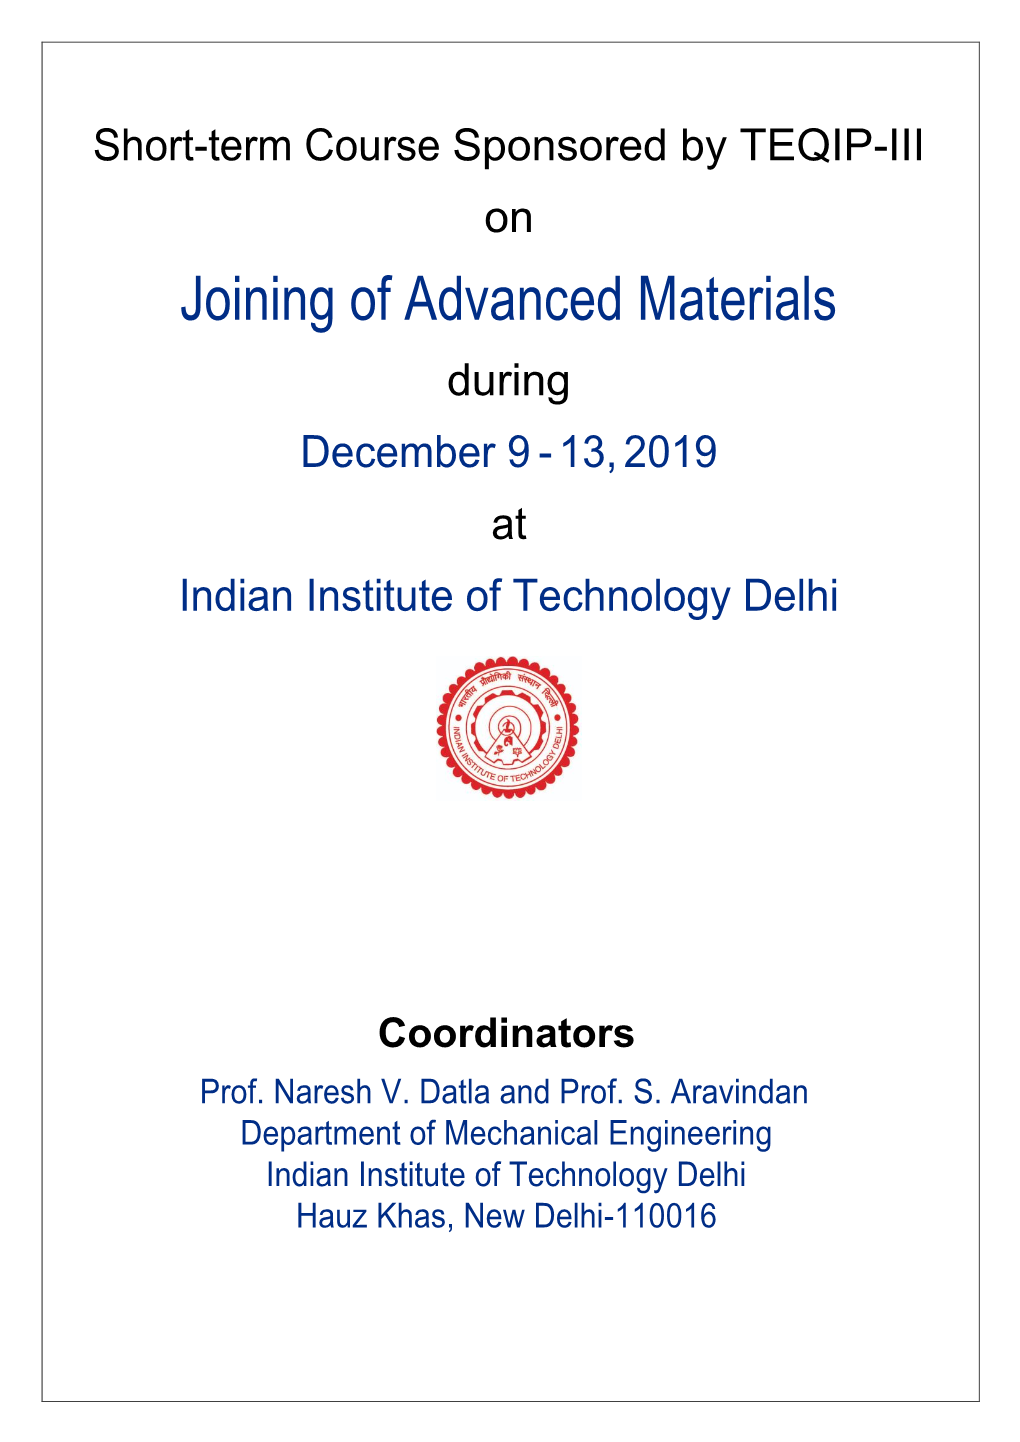 Joining of Advanced Materials During December 9 - 13, 2019 at Indian Institute of Technology Delhi